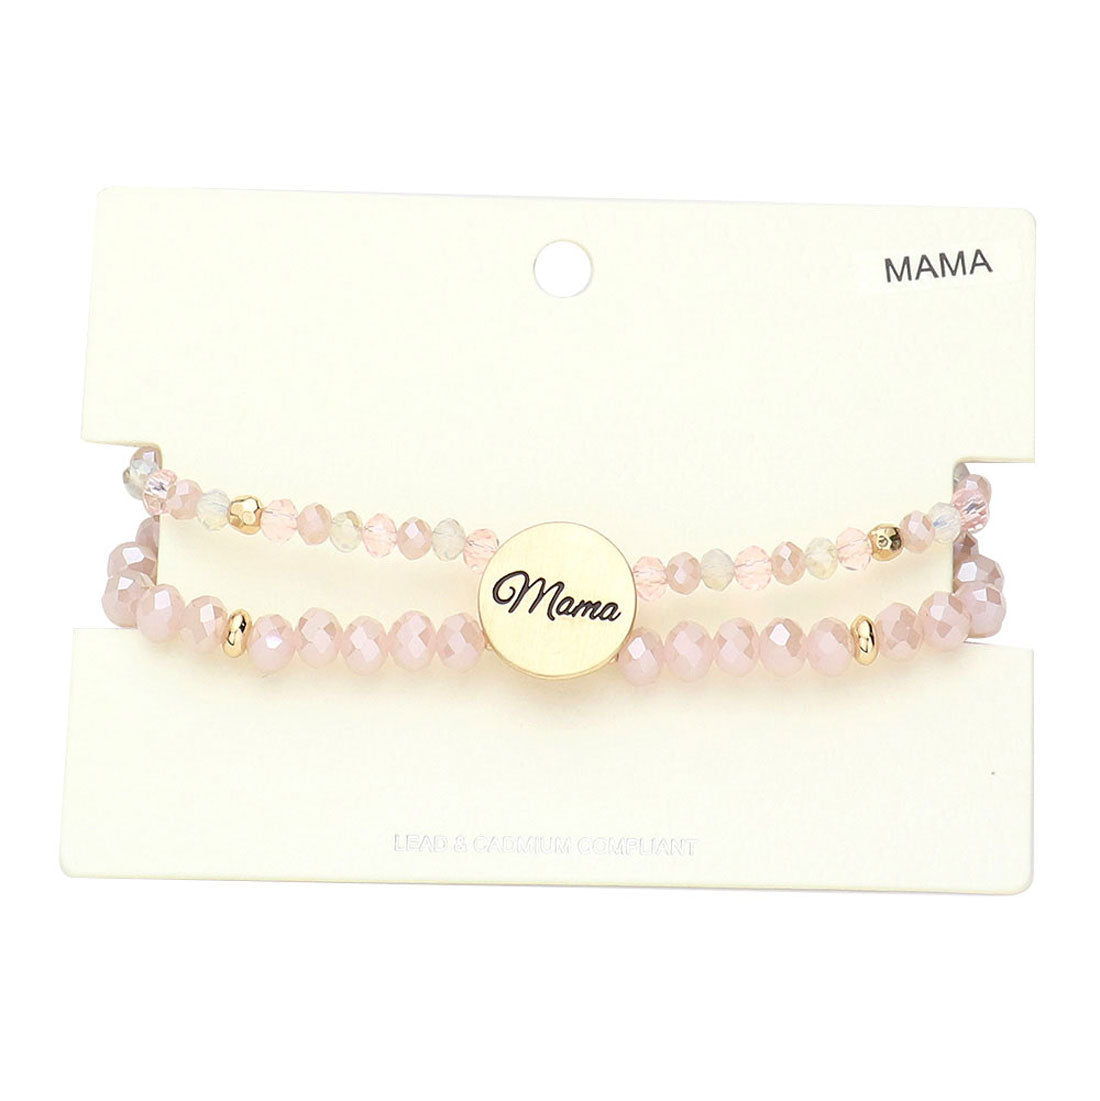 Pink Mama Metal Disc Message Charm Faceted Beaded Stretch Bracelet, these Charm Faceted Beaded Stretch bracelets can light up any outfit, and make you feel absolutely flawless. Fabulous fashion and sleek style adds a pop of pretty color to your attire. Make your mother feel special by giving this Mama Metal bracelet as a gift and expressing your love for your mother on this Mother's Day. 